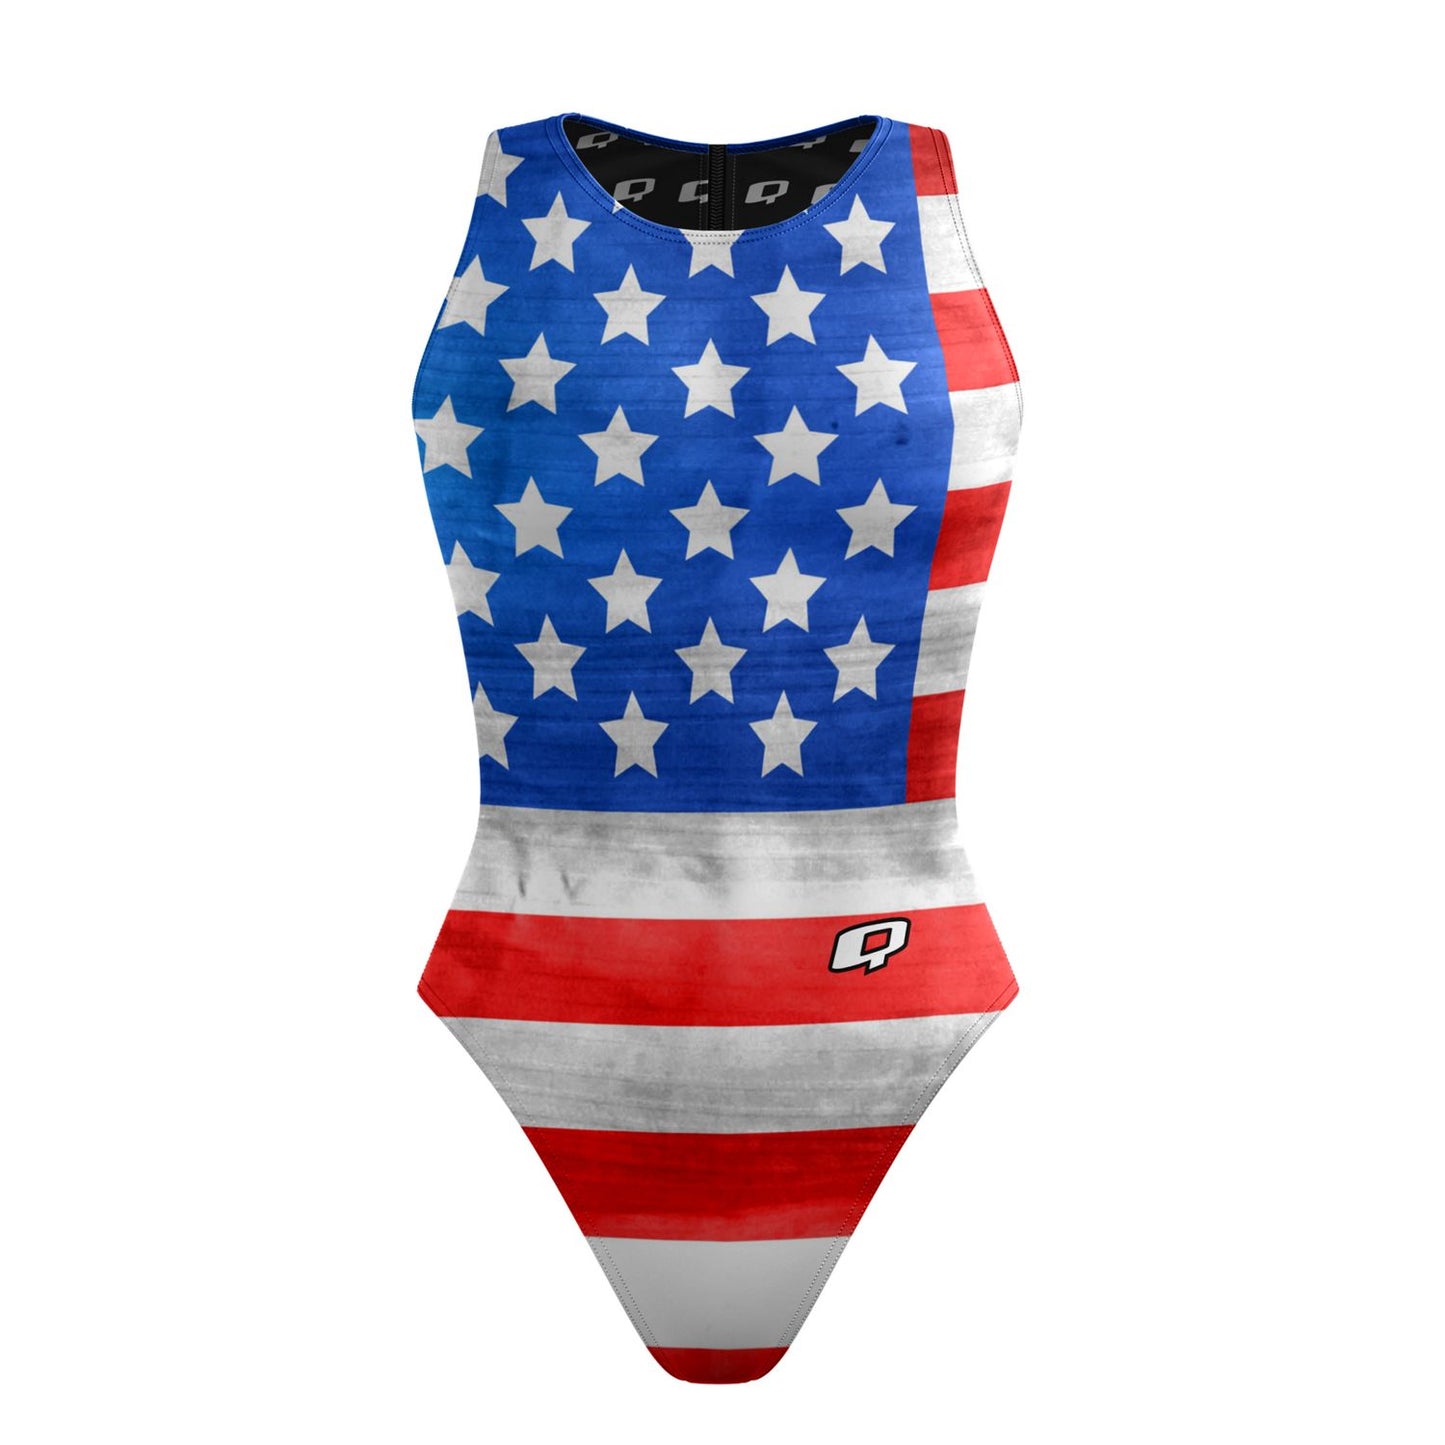 US Of A - Women Waterpolo Swimsuit Classic Cut